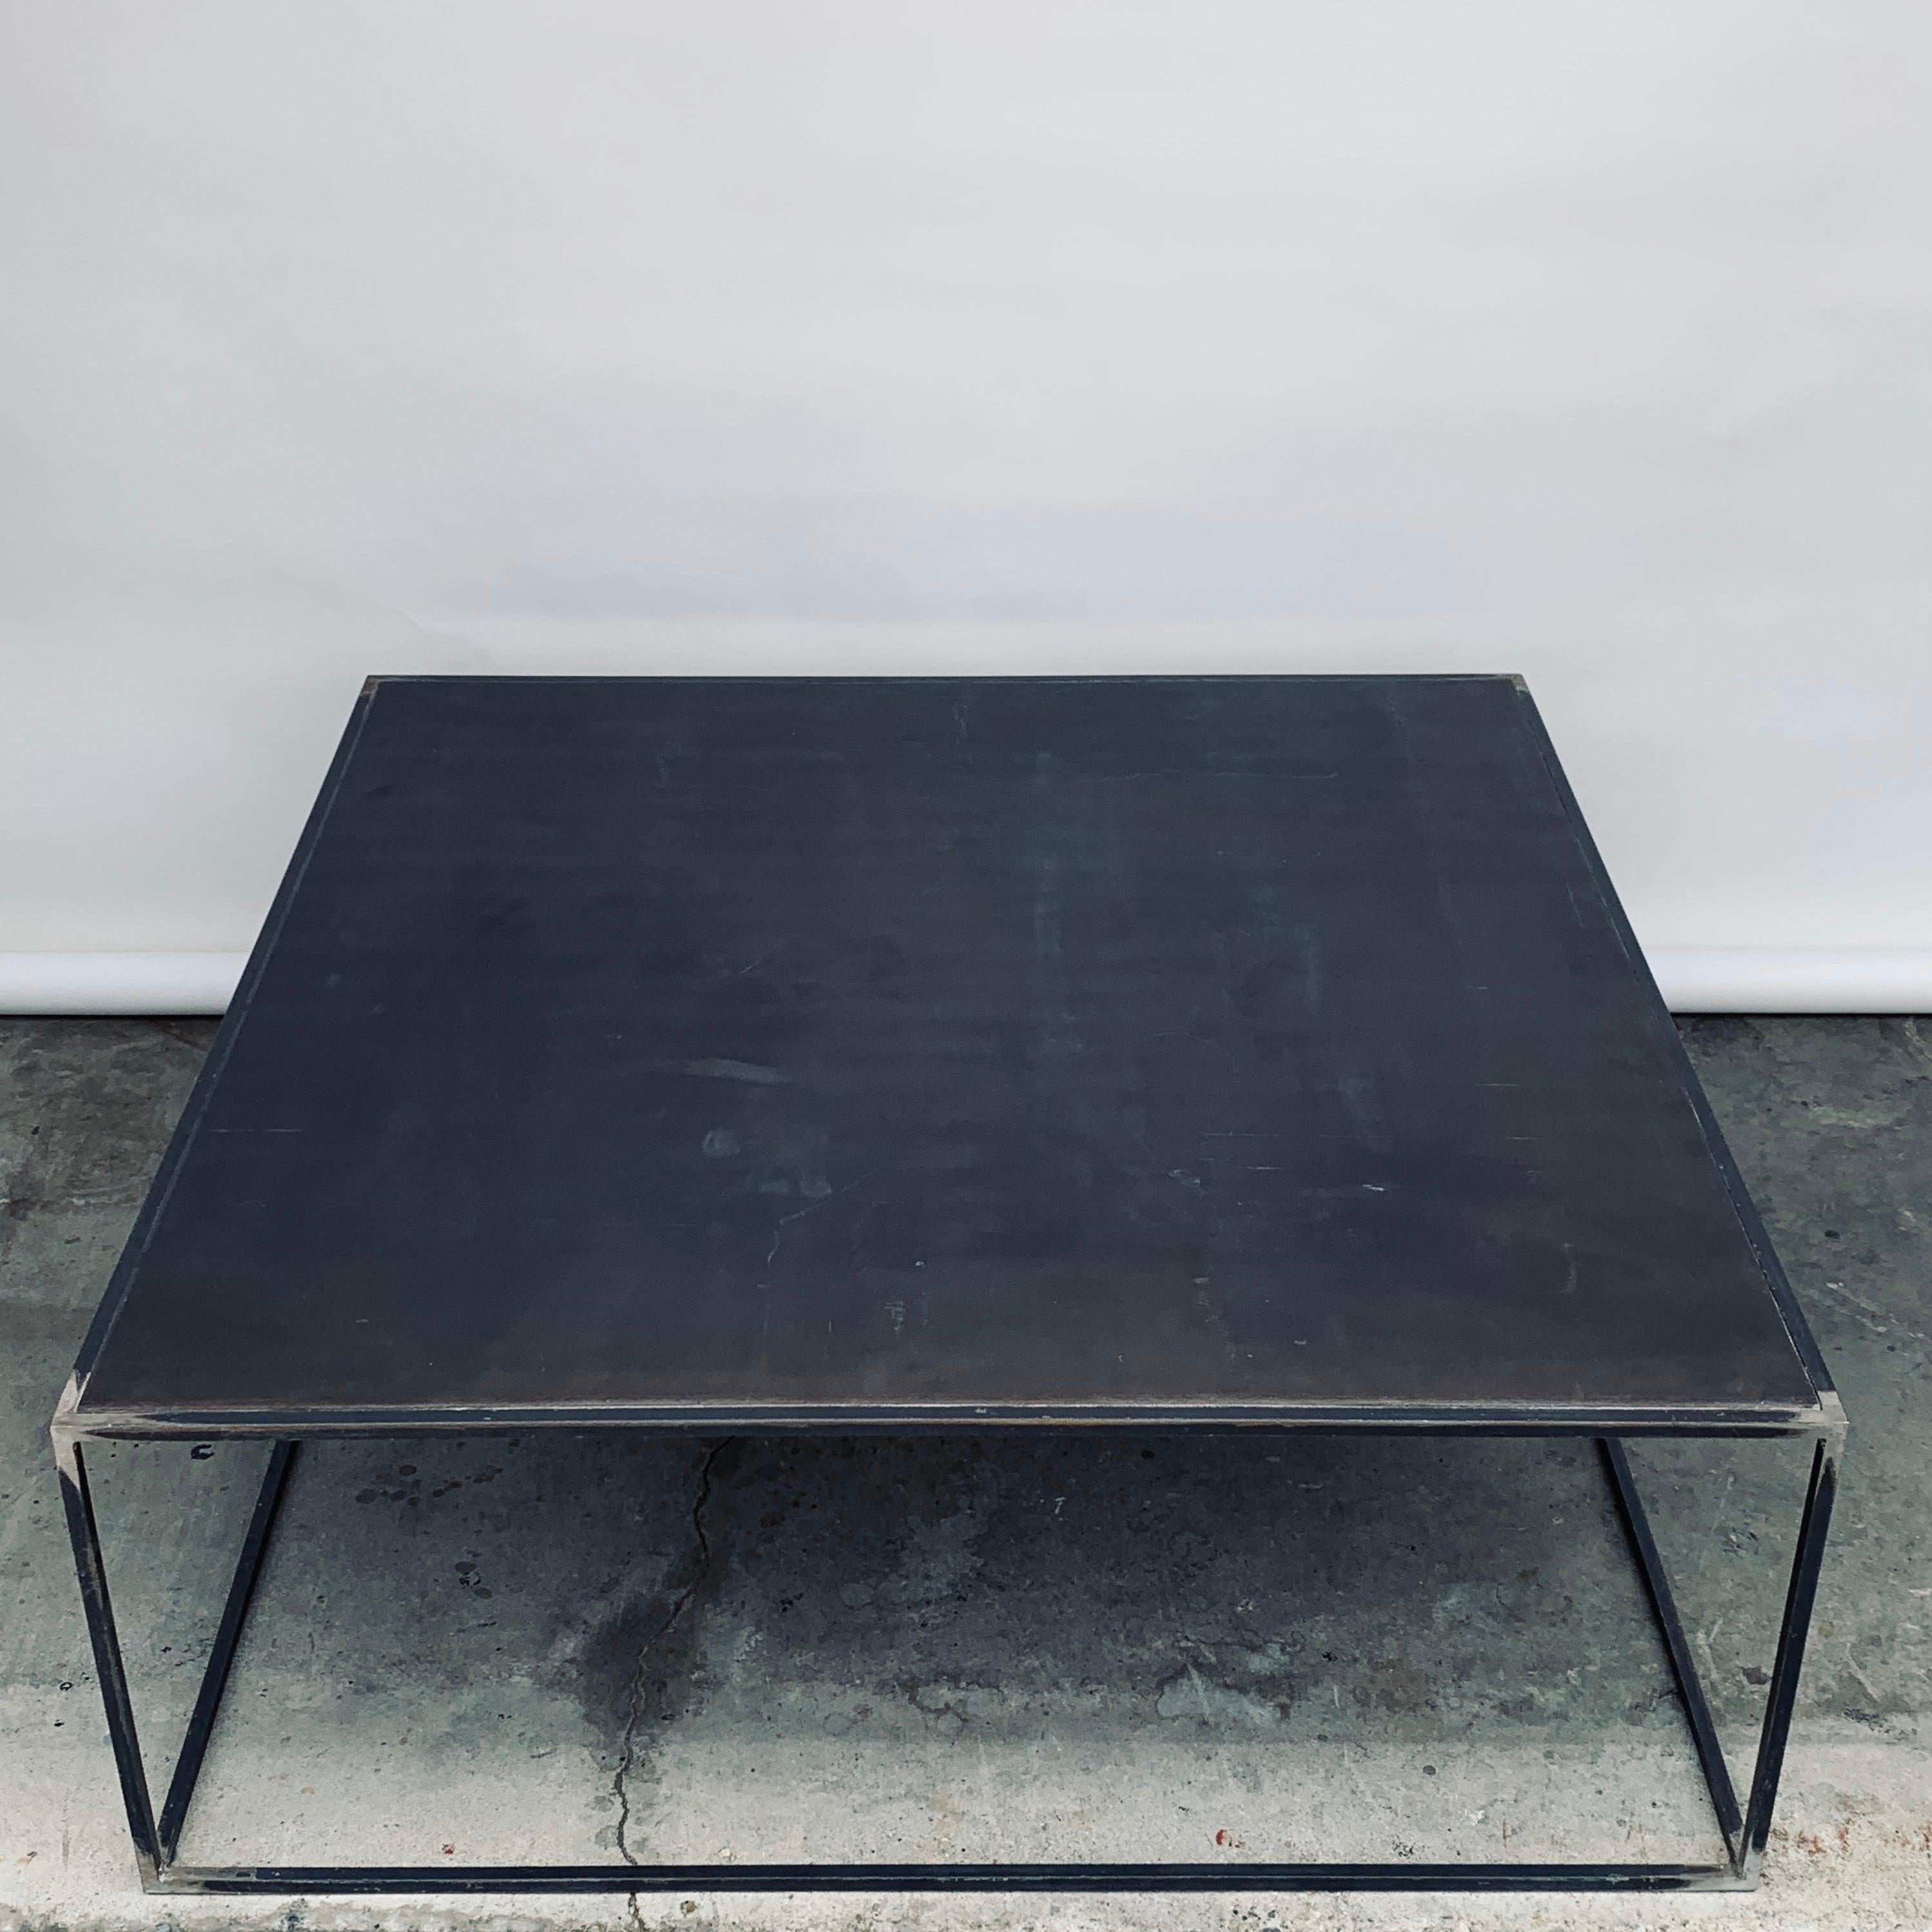 Minimalist 'Filiforme' patinated steel square coffee tables by Design Frères. Sealed.